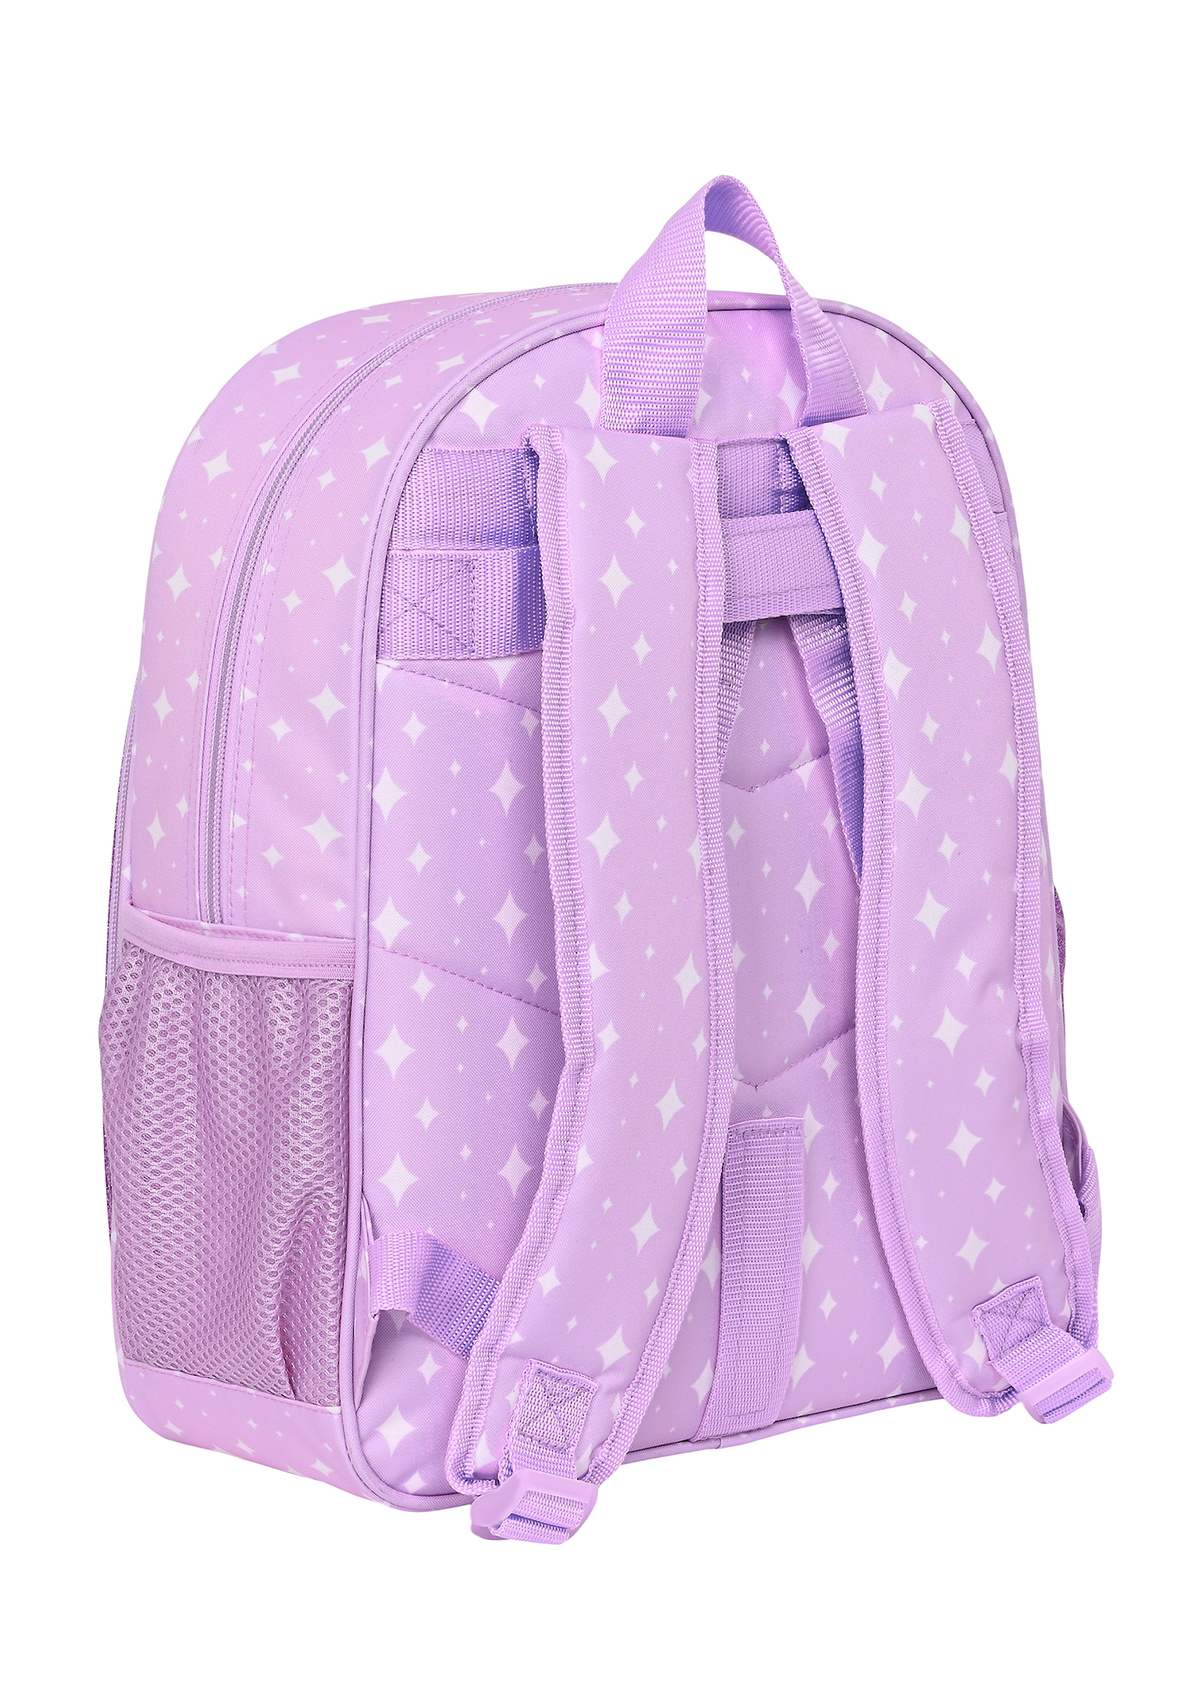 My Little Pony Junior Backpack